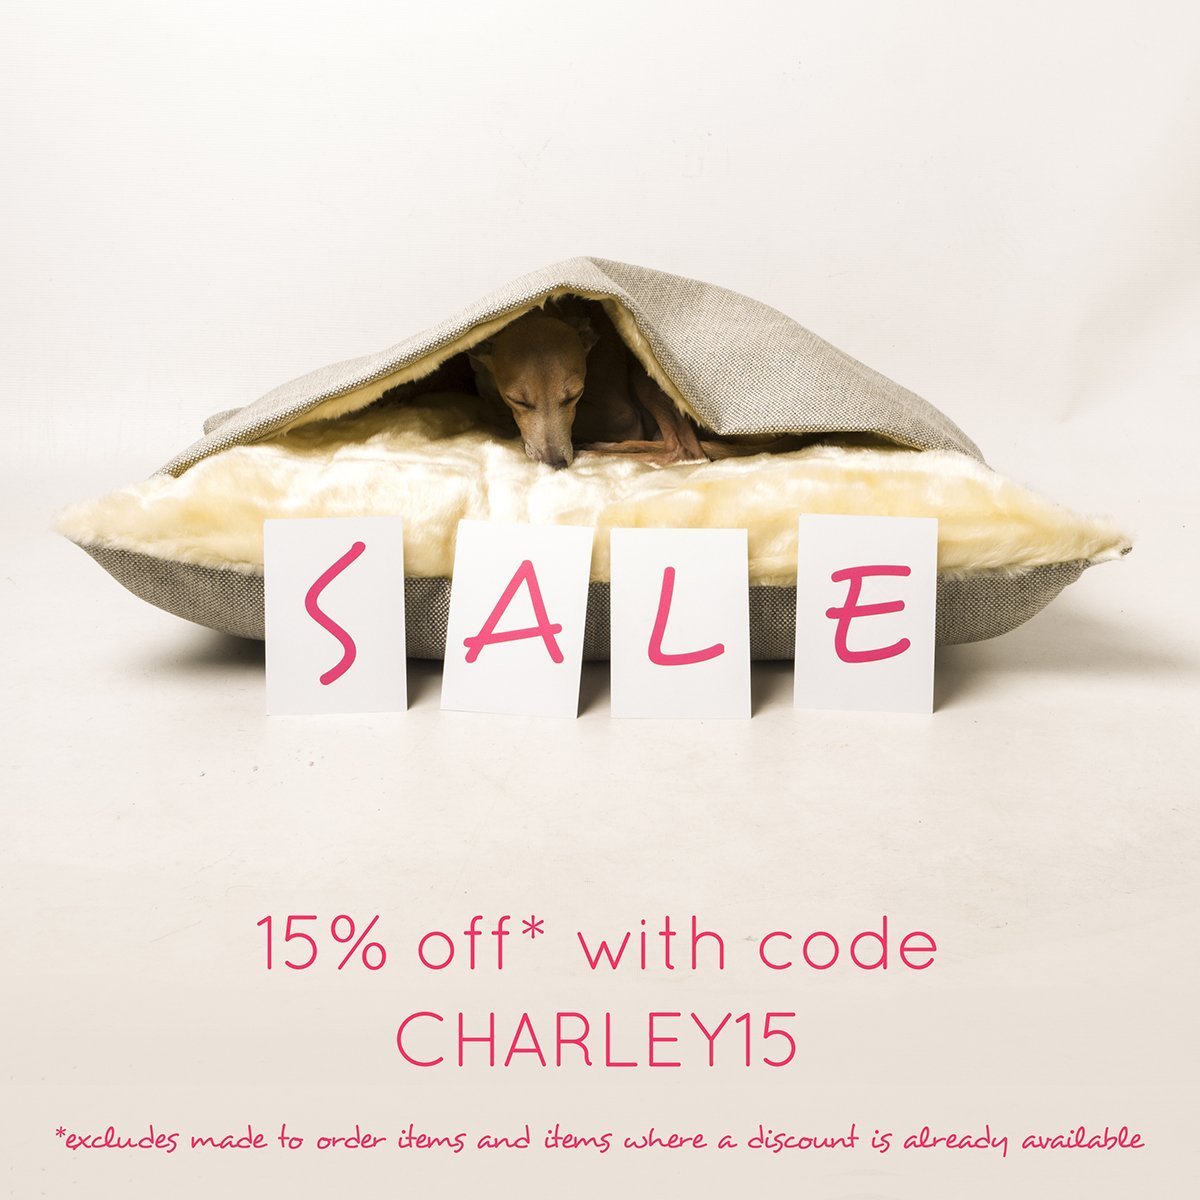 Our summer sale is now on with a fab 15% off!